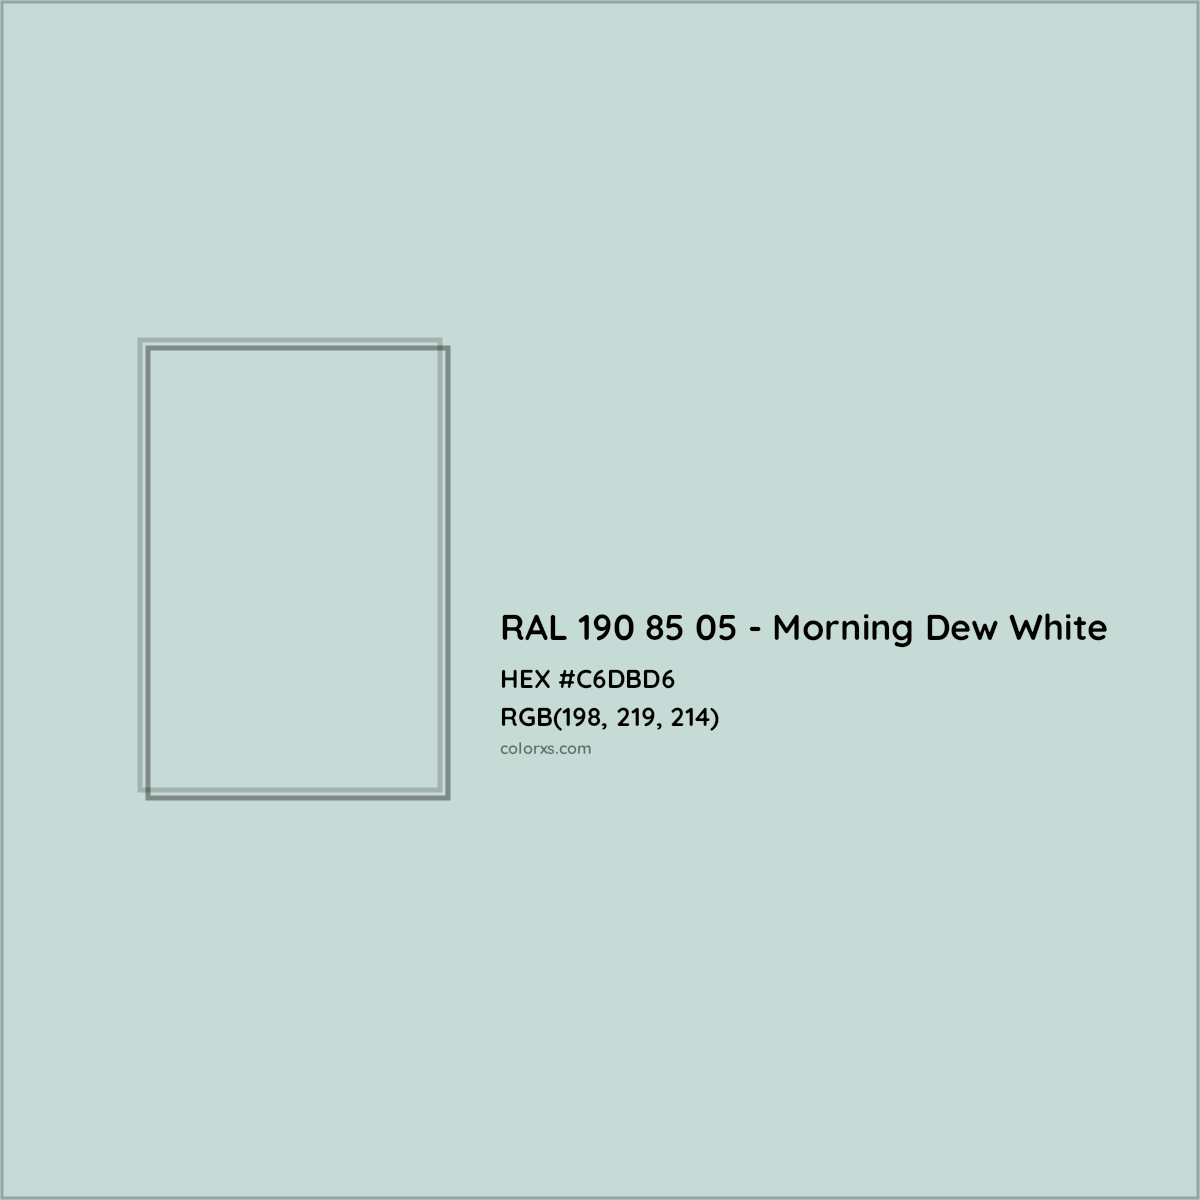 HEX #C6DBD6 RAL 190 85 05 - Morning Dew White CMS RAL Design - Color Code